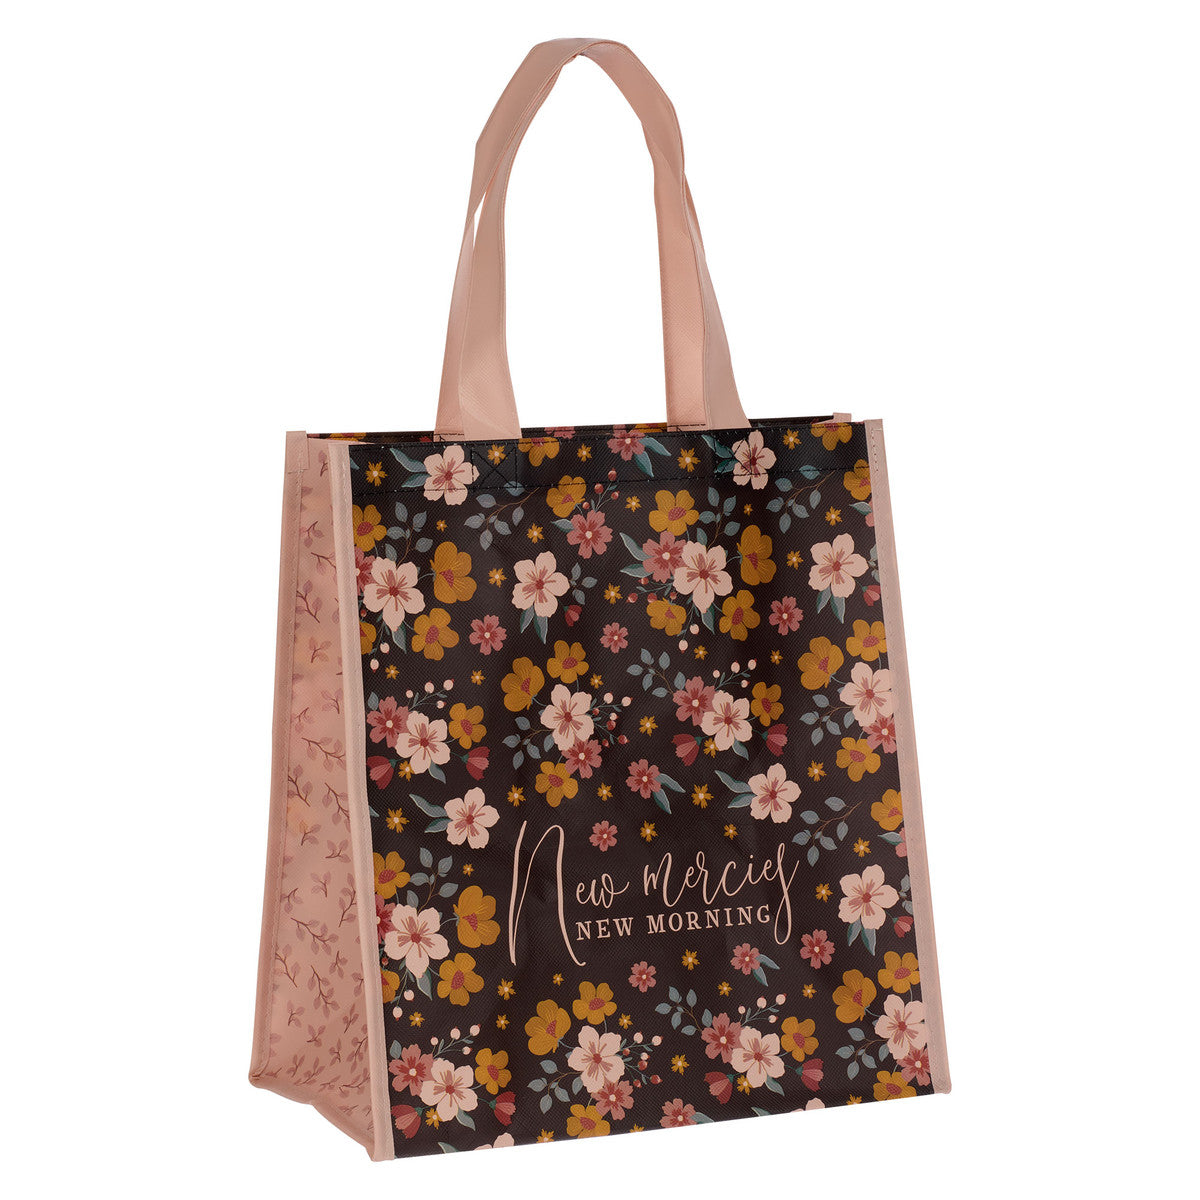 New Mercies New Morning Non-Woven Coated Tote Bag - The Christian Gift Company